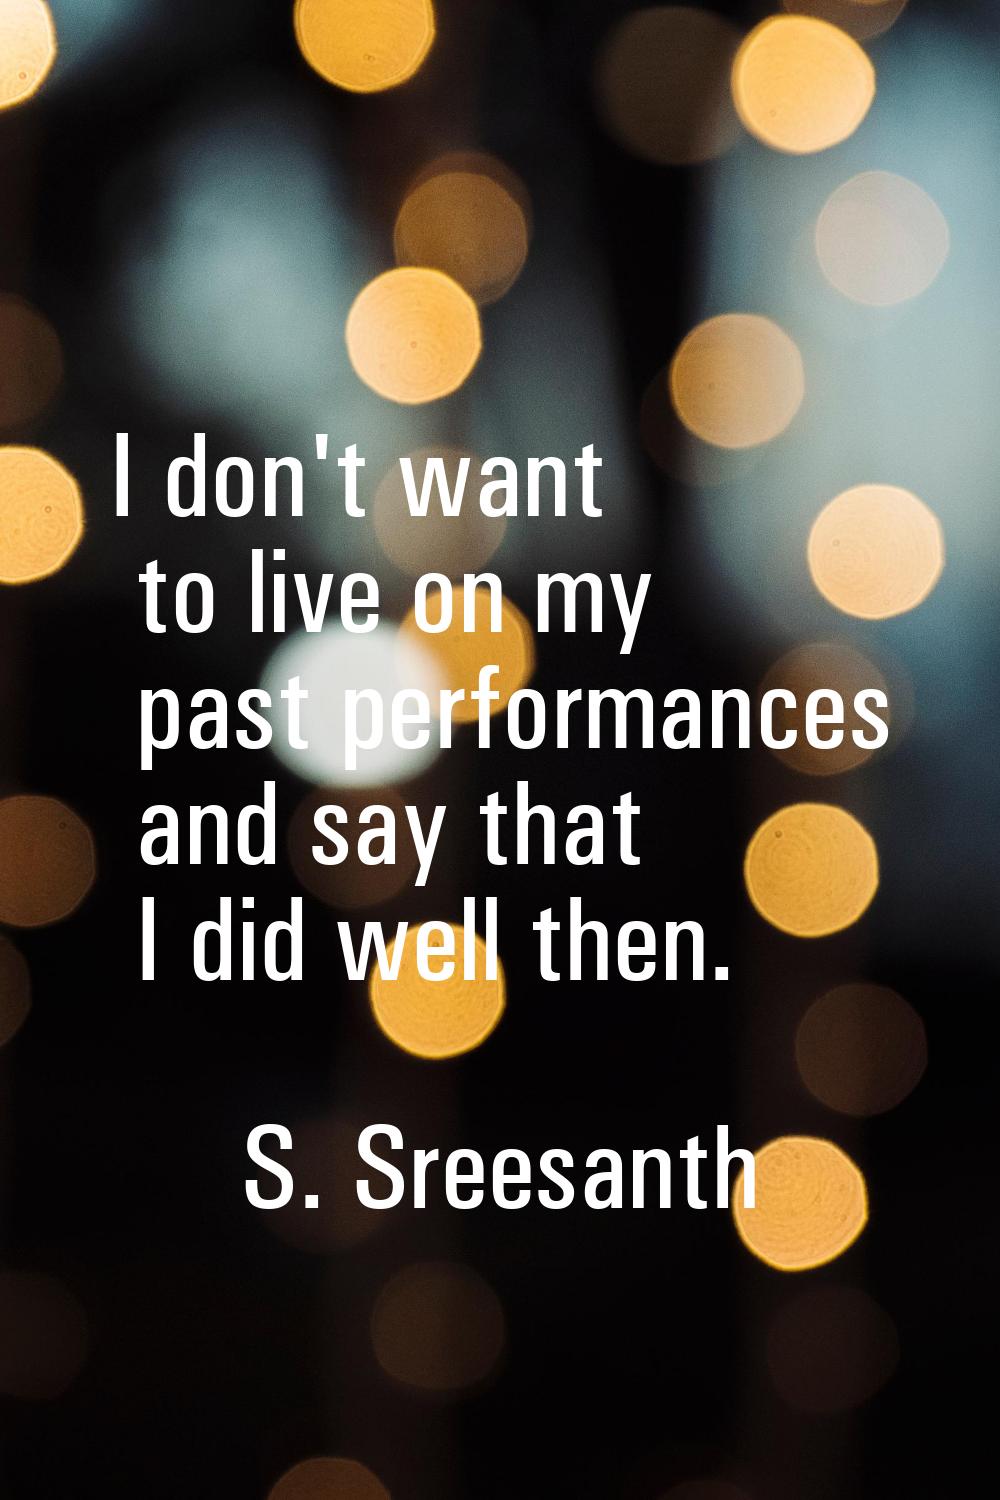 I don't want to live on my past performances and say that I did well then.